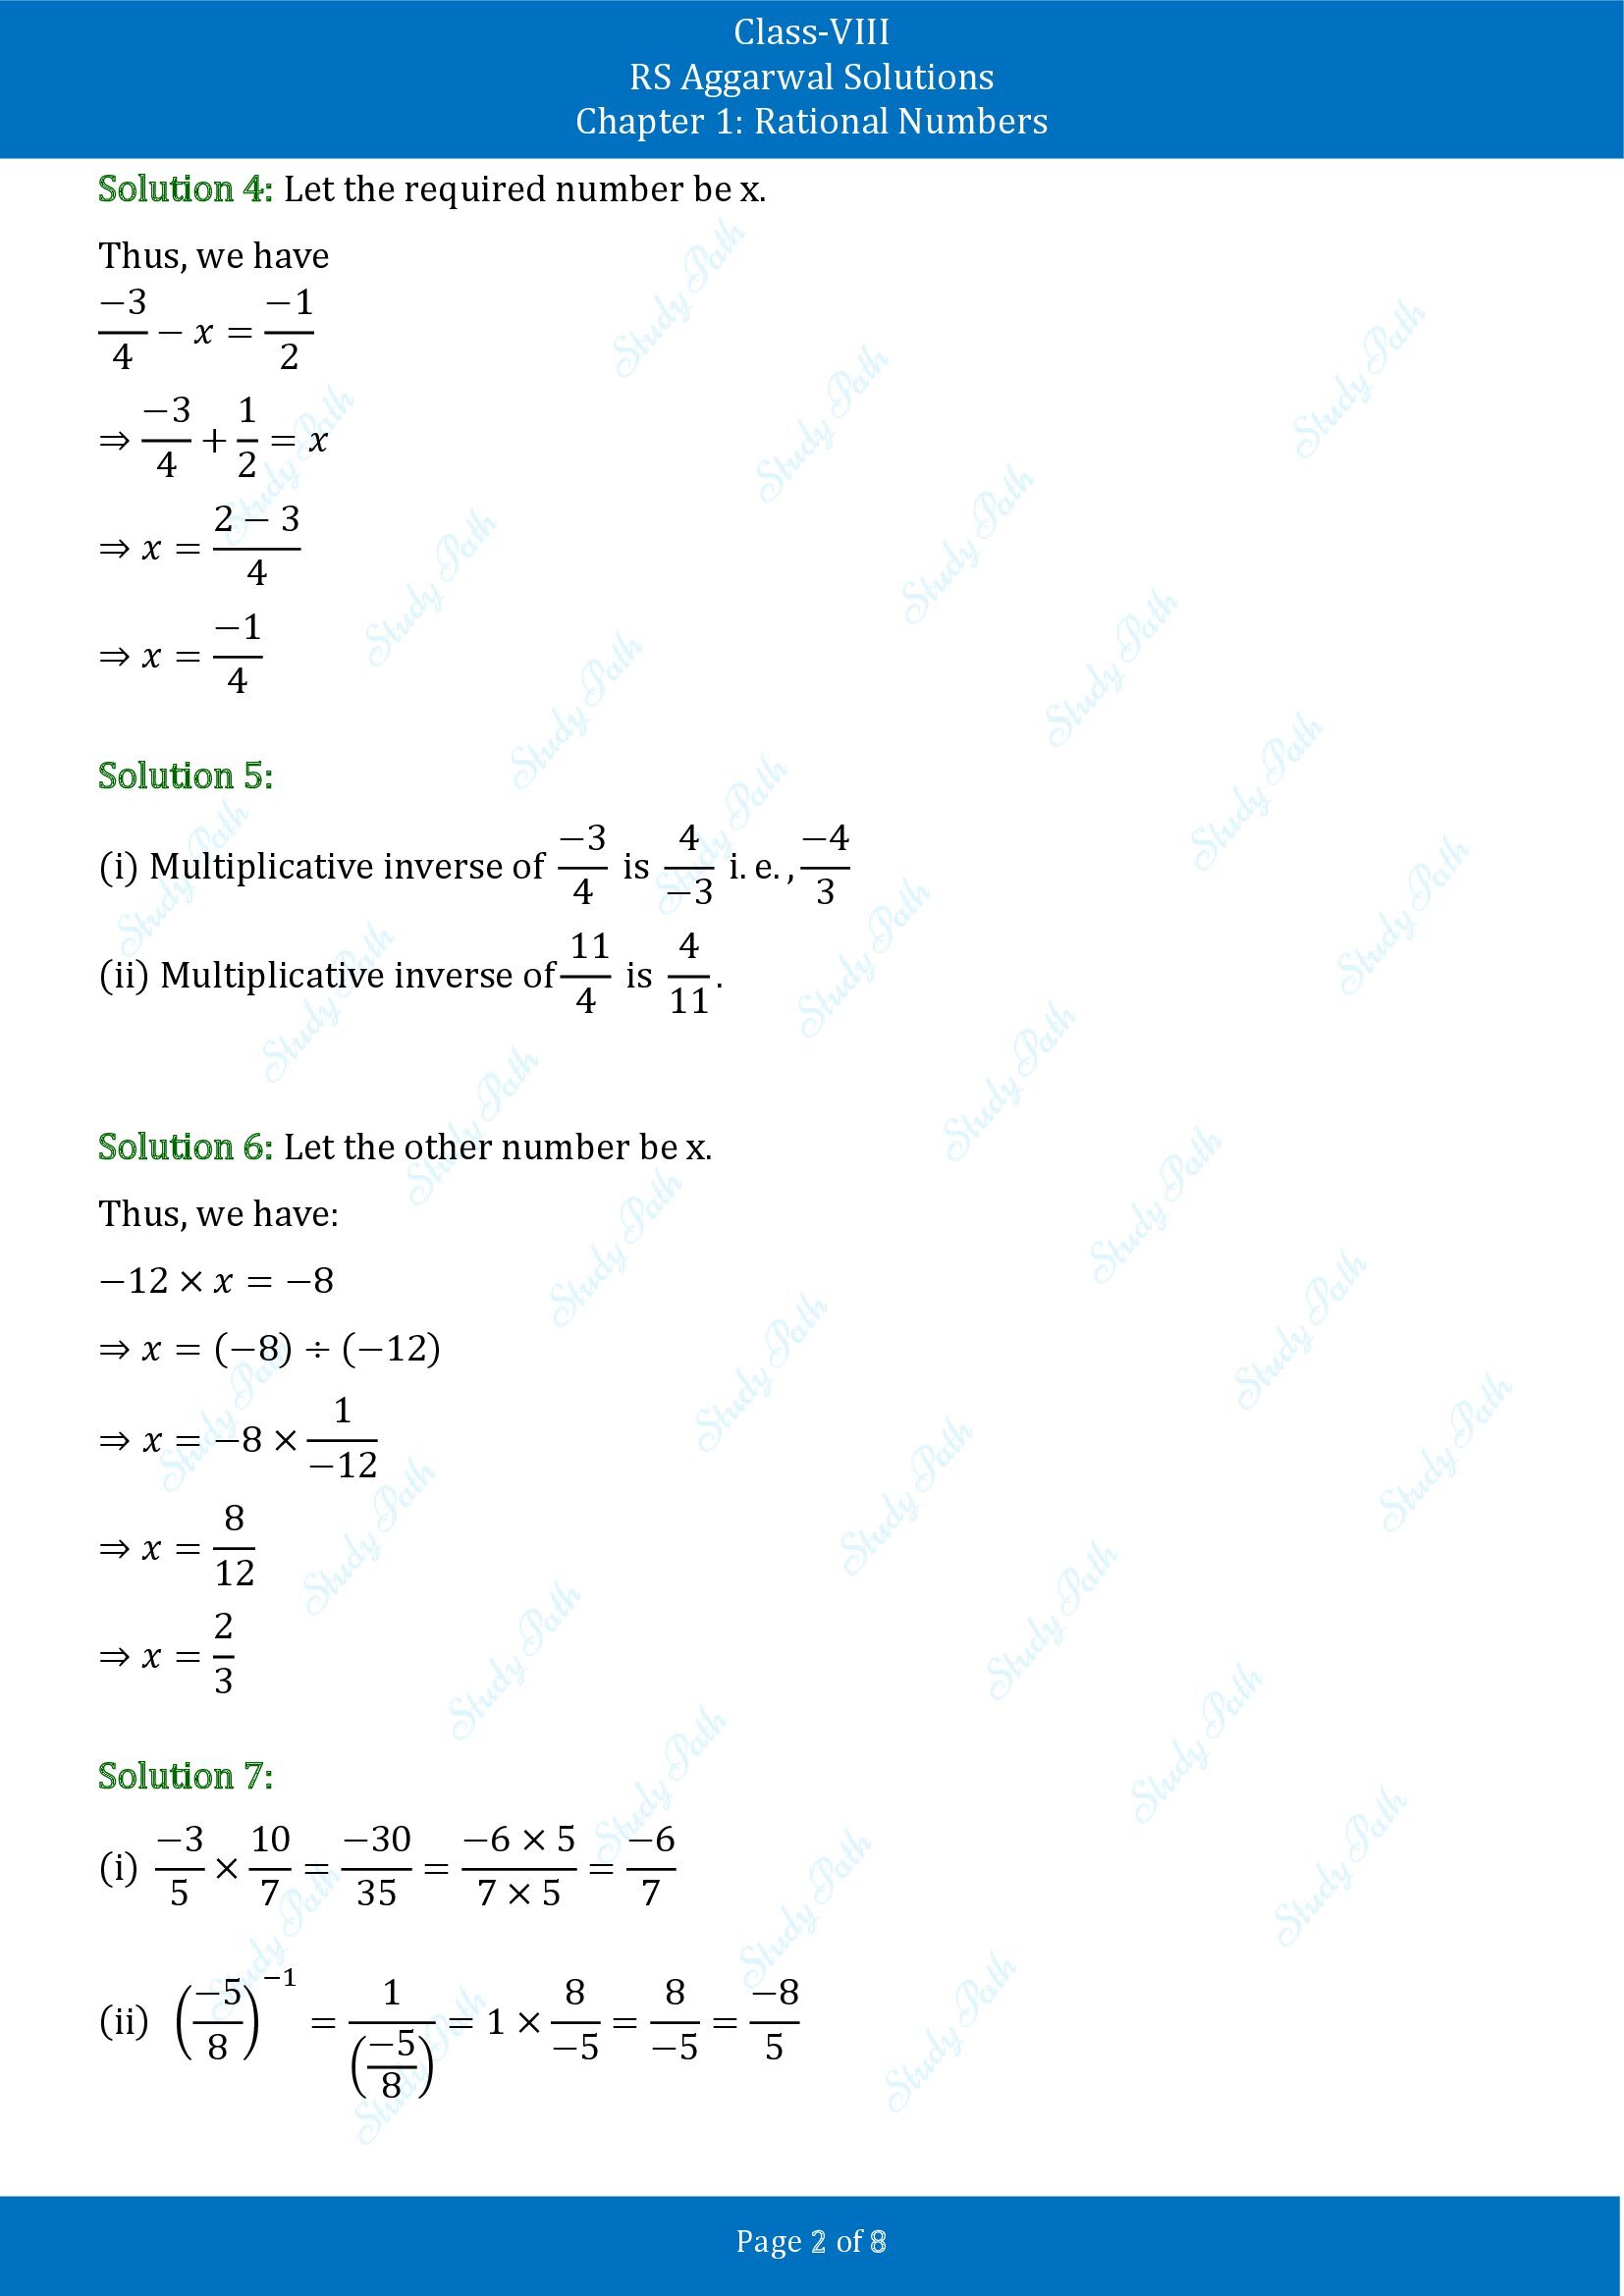 RS Aggarwal Solutions Class 8 Chapter 1 Rational Numbers Test Paper 00002